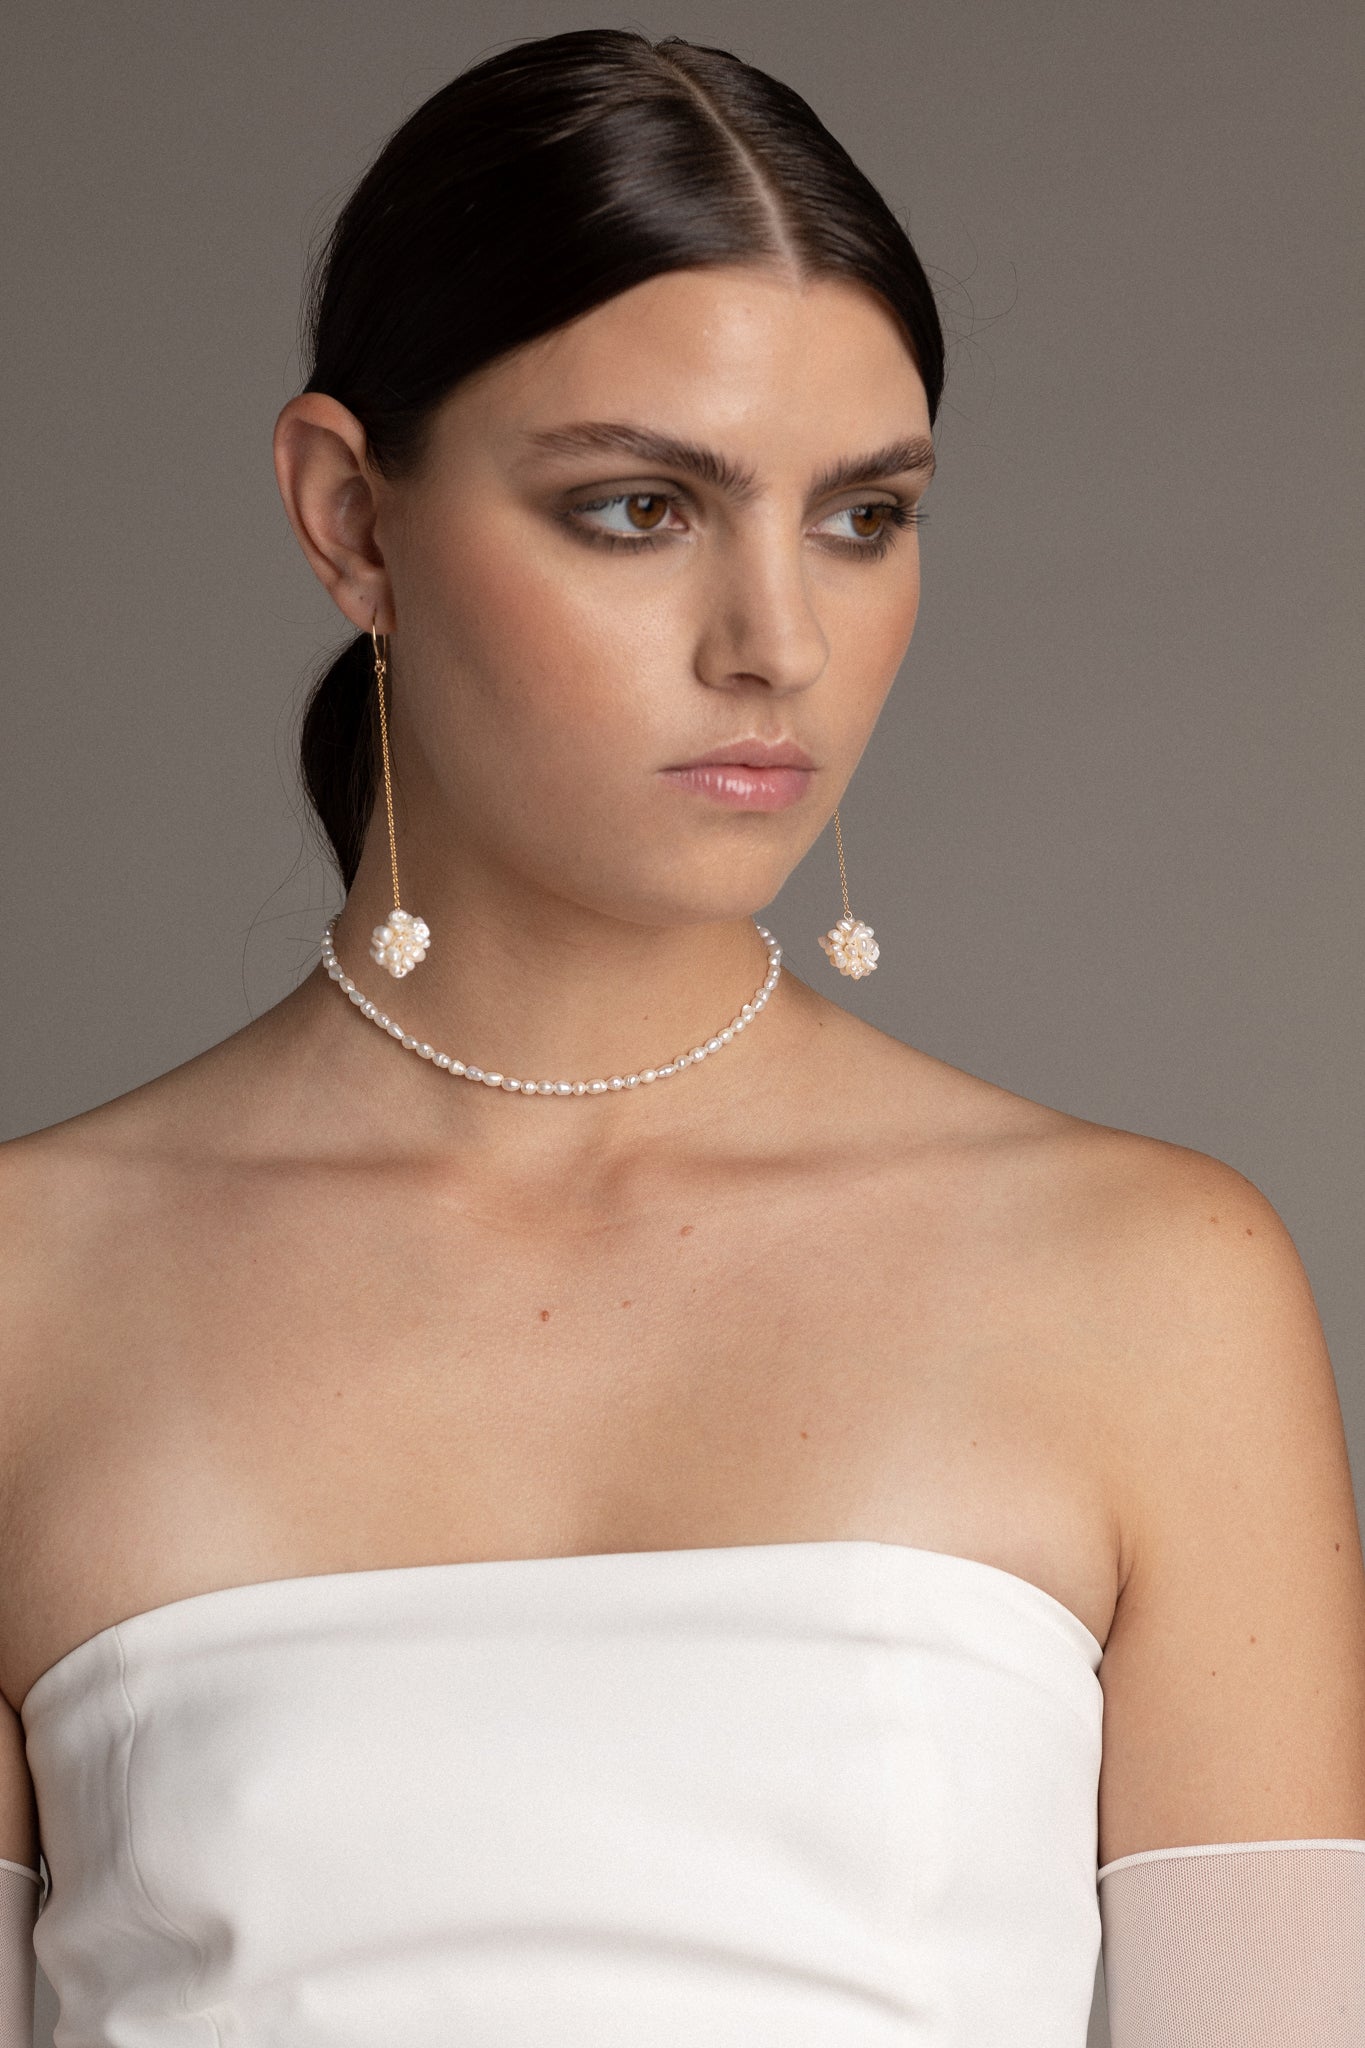 This choker showcases petite, irregular freshwater pearls strung on a wire, creating a distinctive and captivating look. P